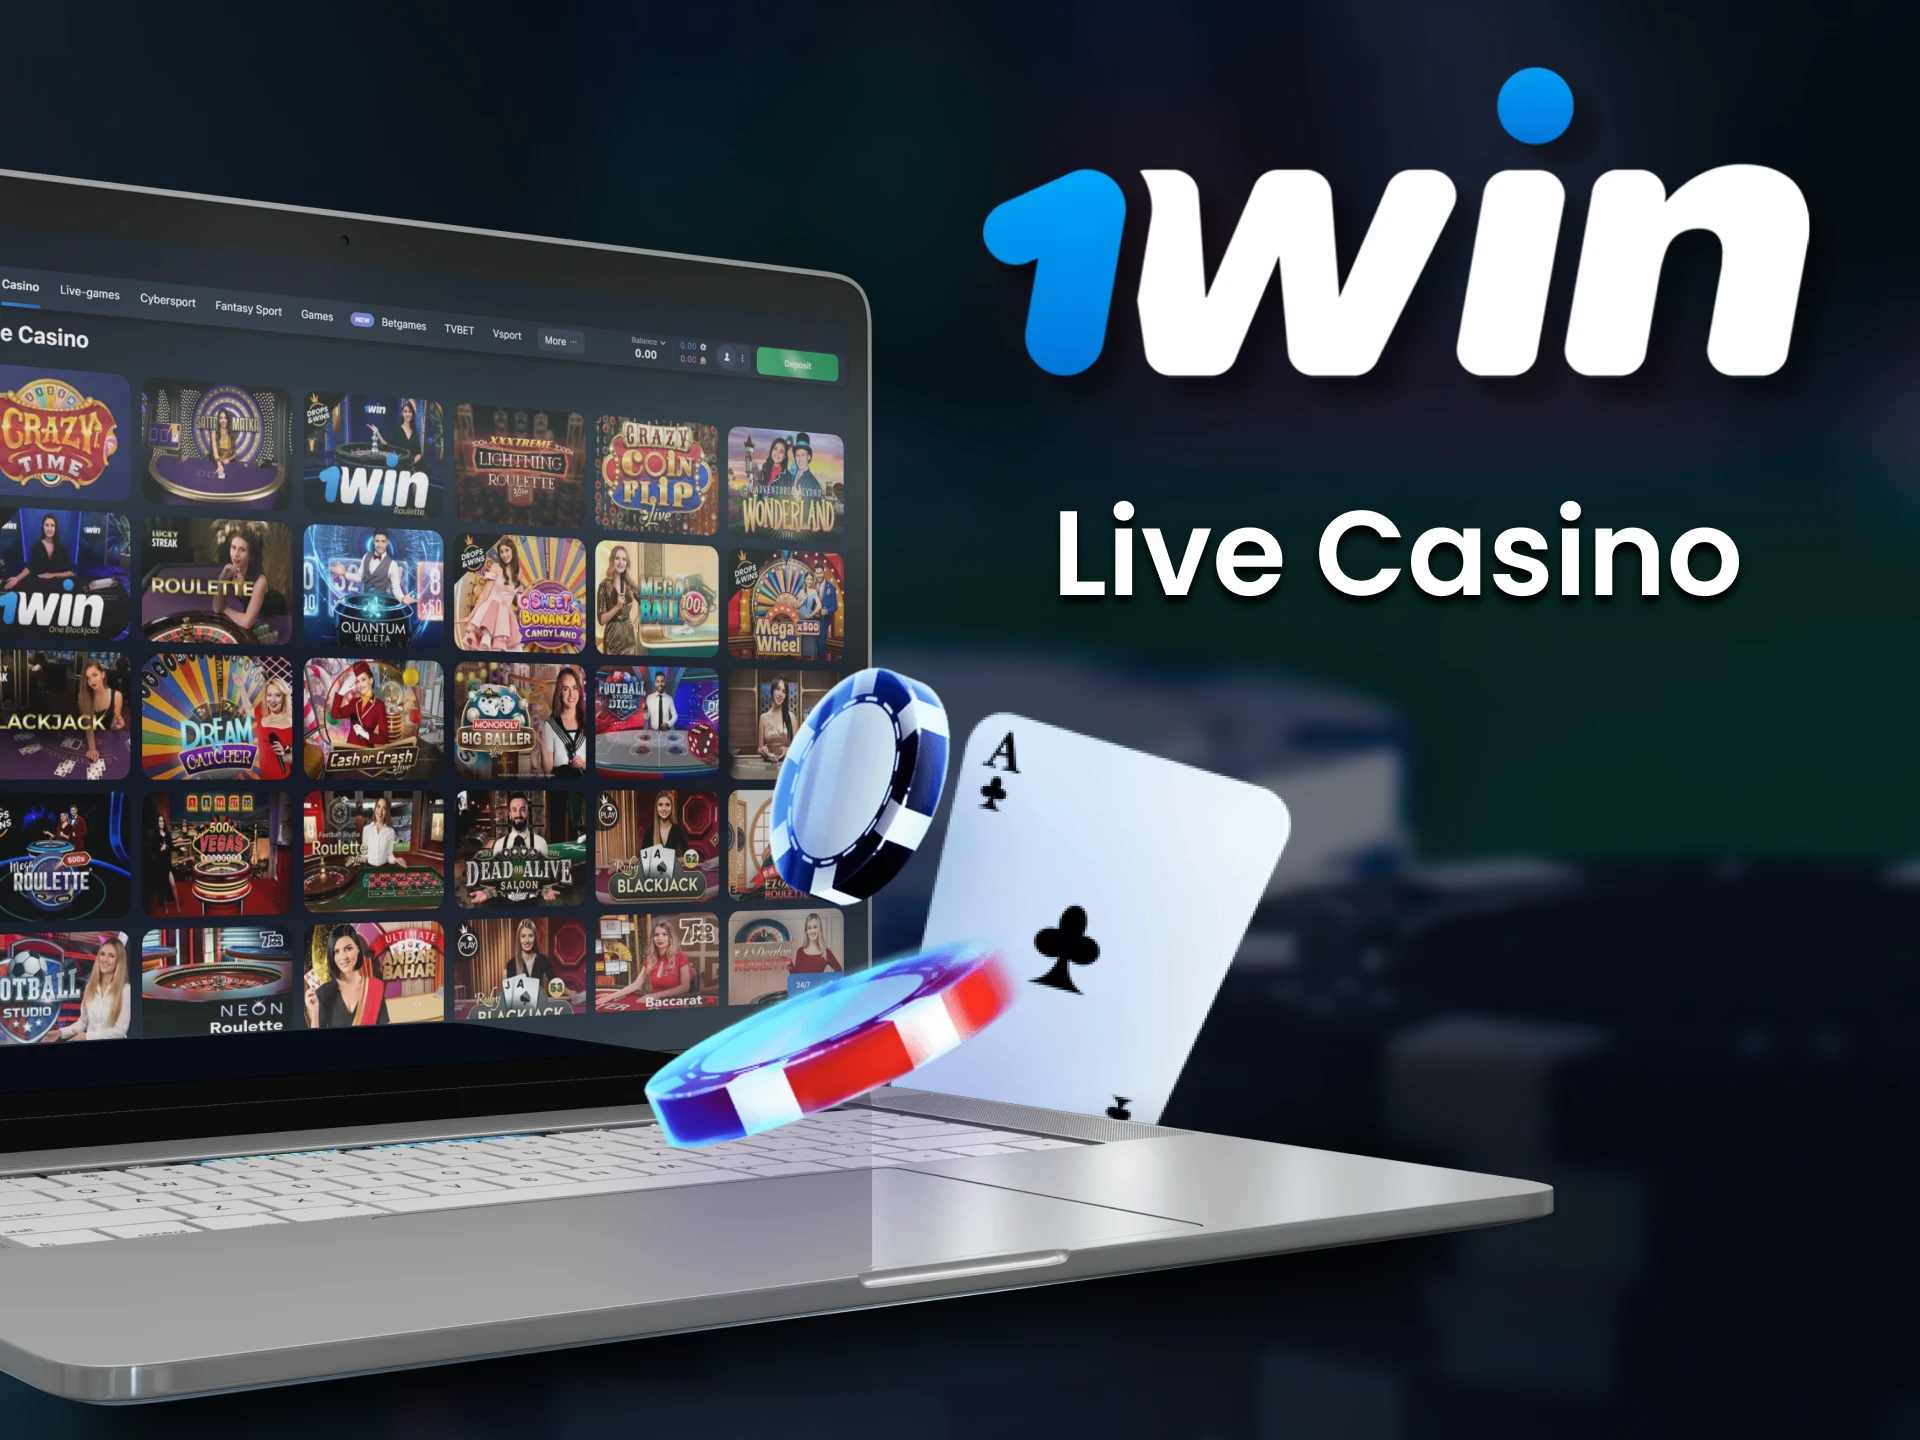 If you prefer real casino emotions try 1win live casino.